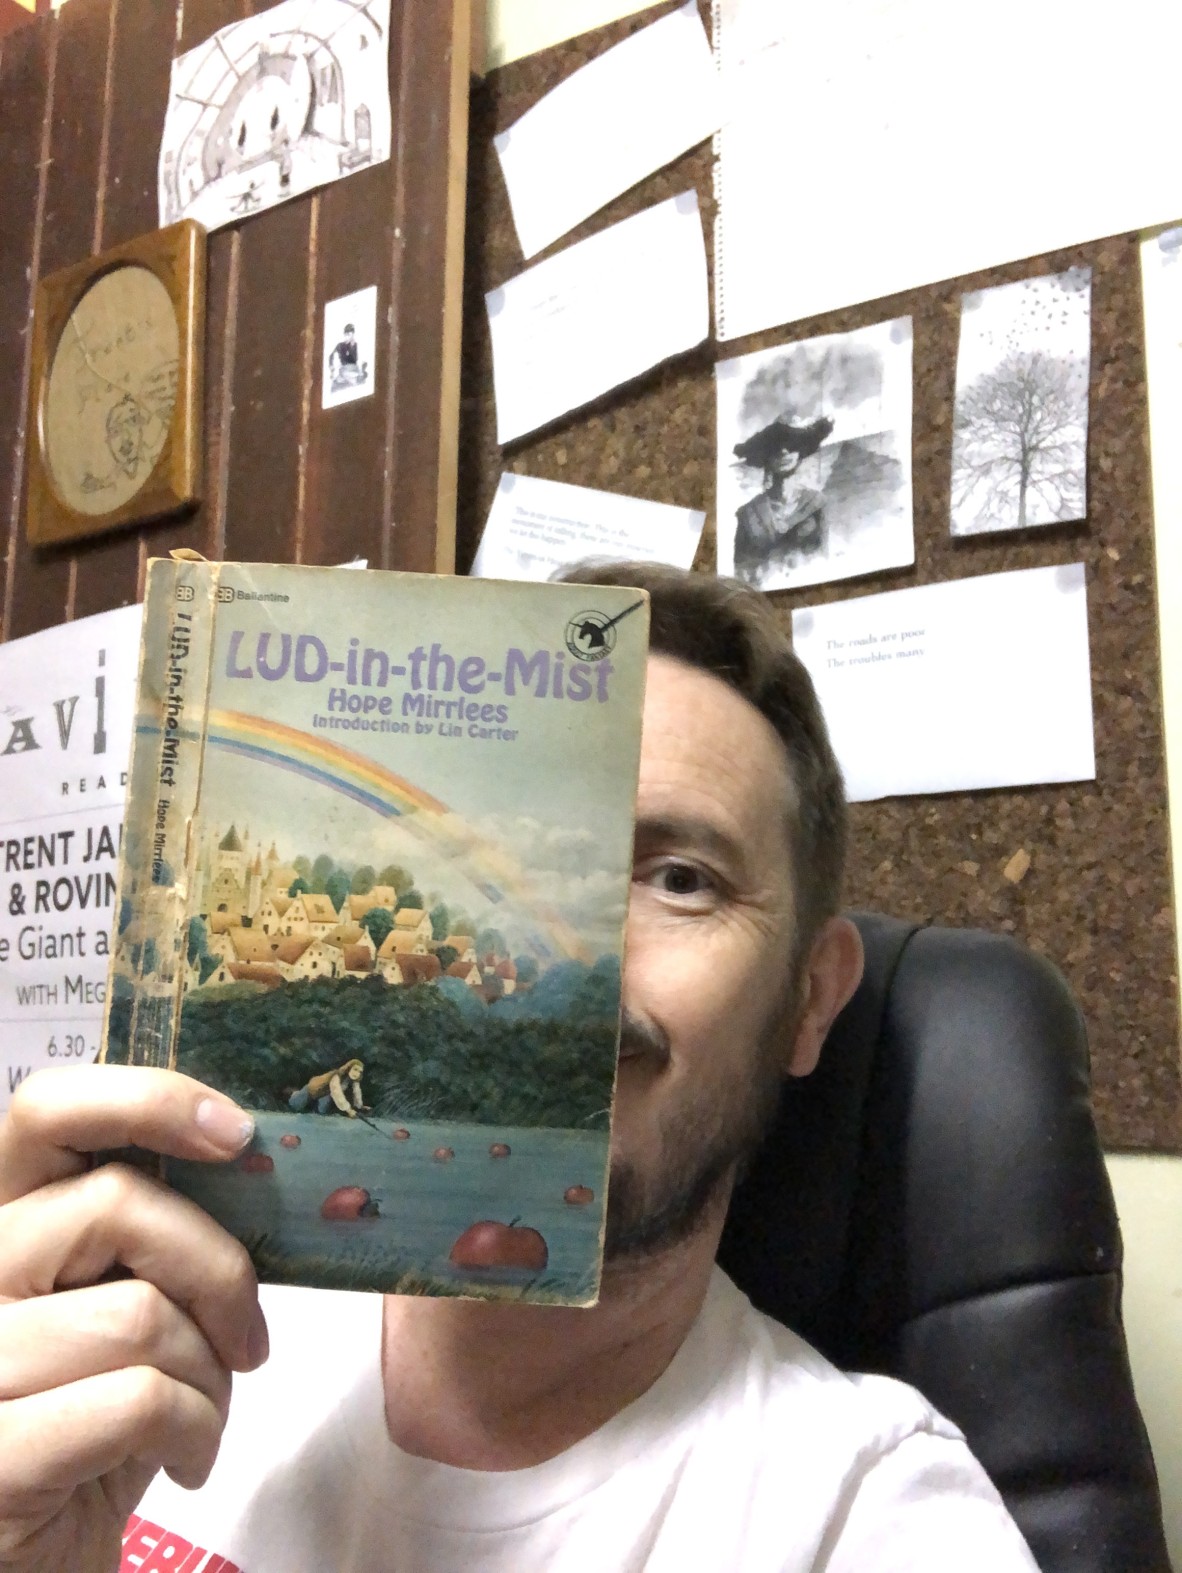 Trent Jamieson holds up a copy of Lud-in-the-mist by Hope Mirrlees Trent sits in front of a pin board